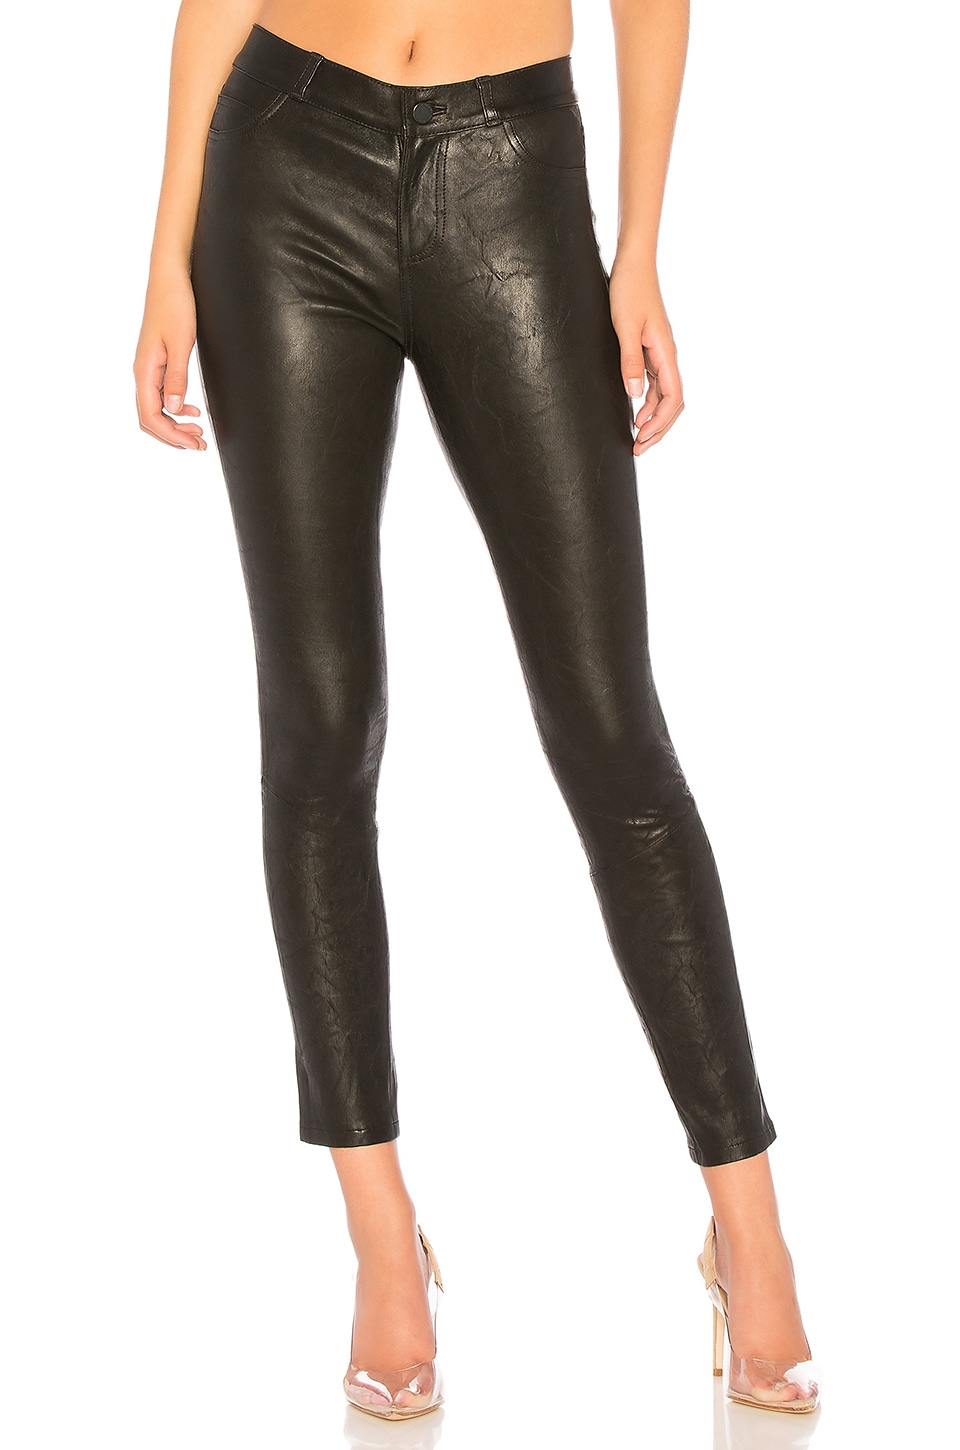 PAIGE Verdugo Leather Pant in Black 